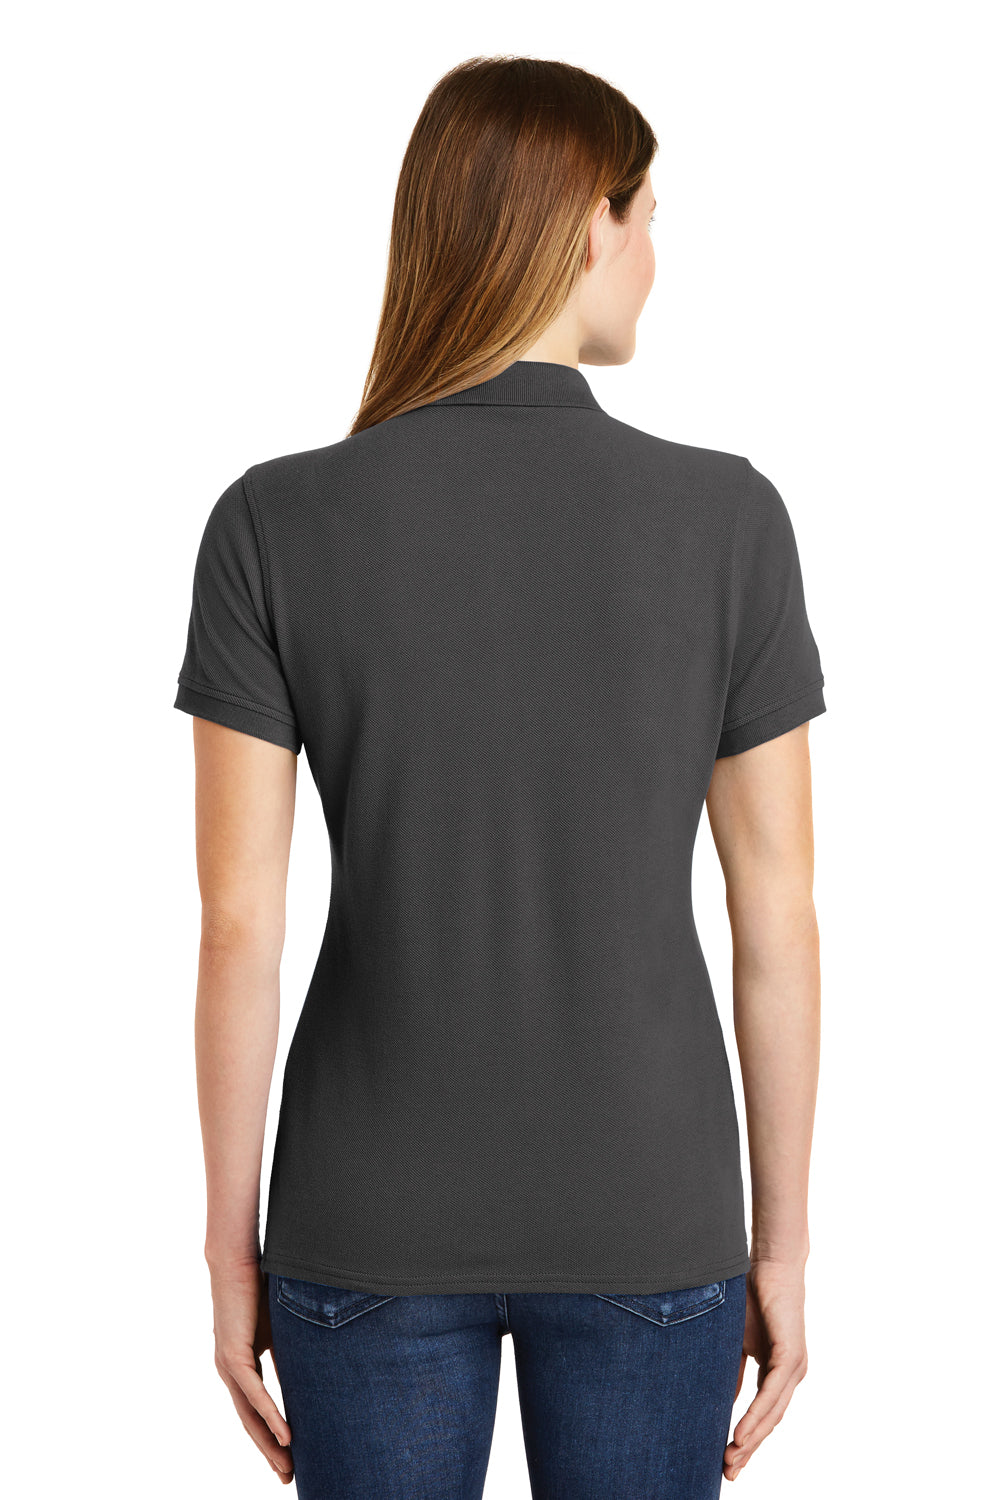 Port & Company LKP1500 Womens Stain Resistant Short Sleeve Polo Shirt Charcoal Grey Back